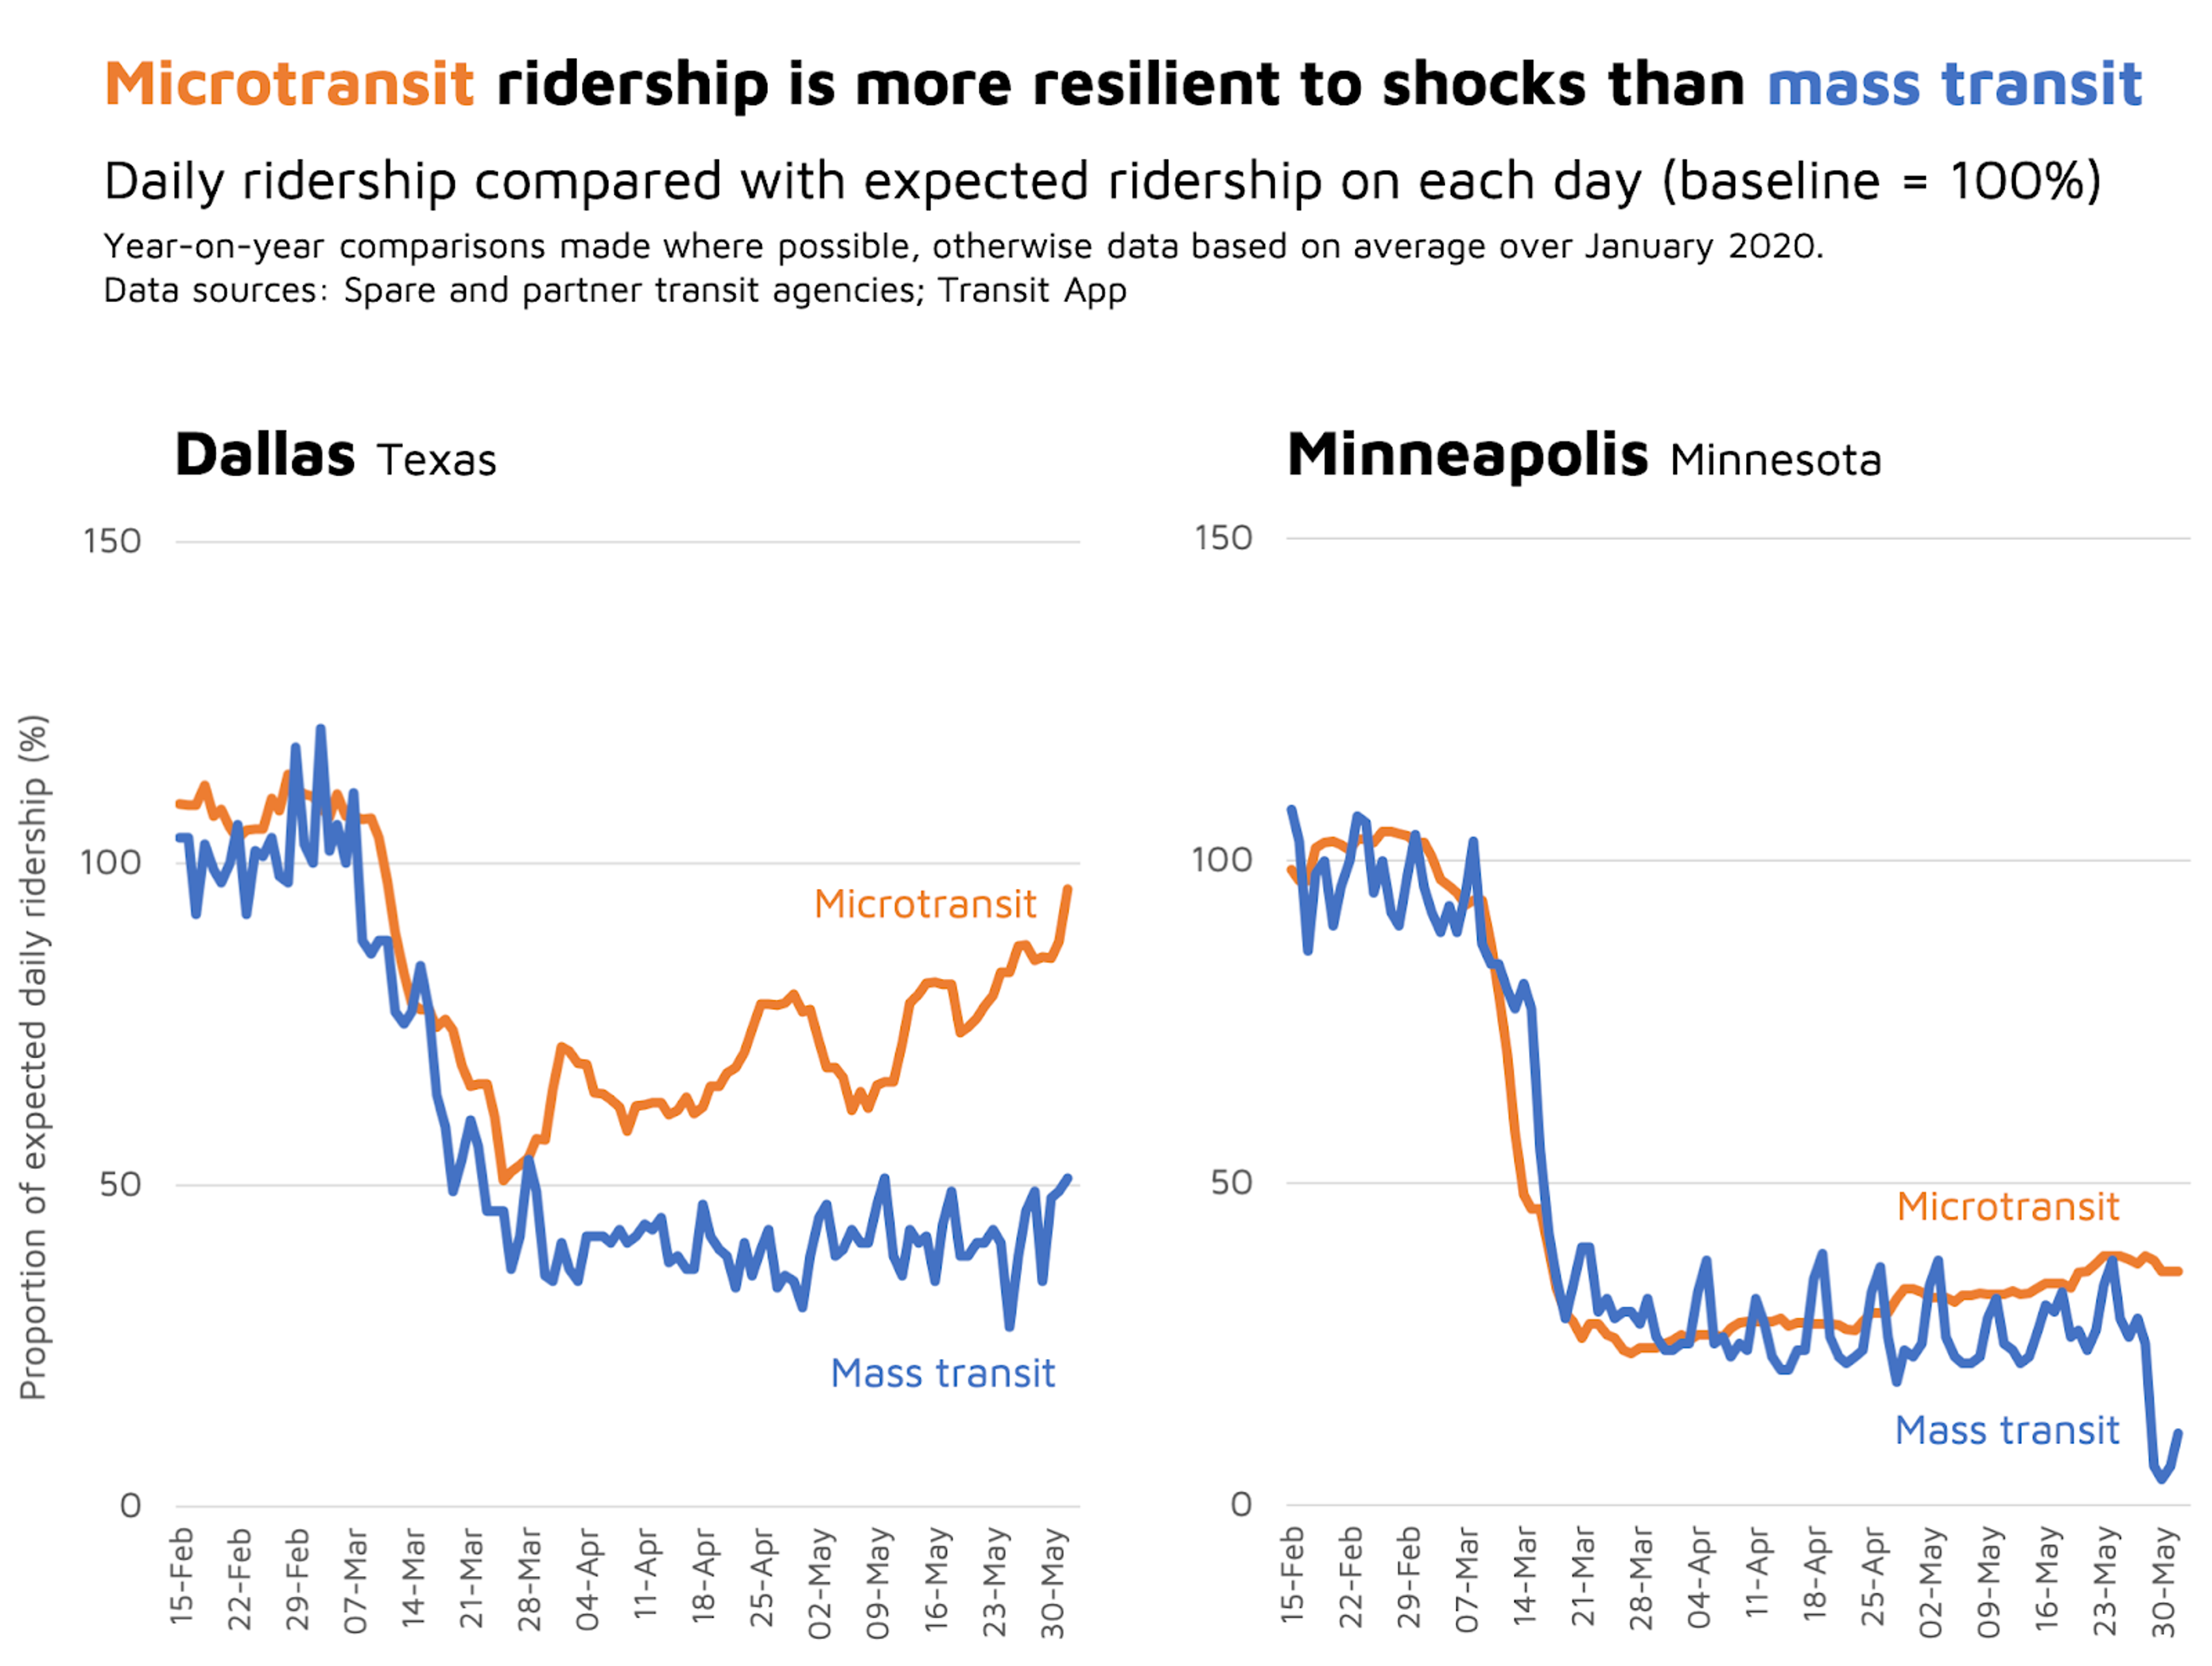 Microtransit ridership is more resilient to shocks than mass transit